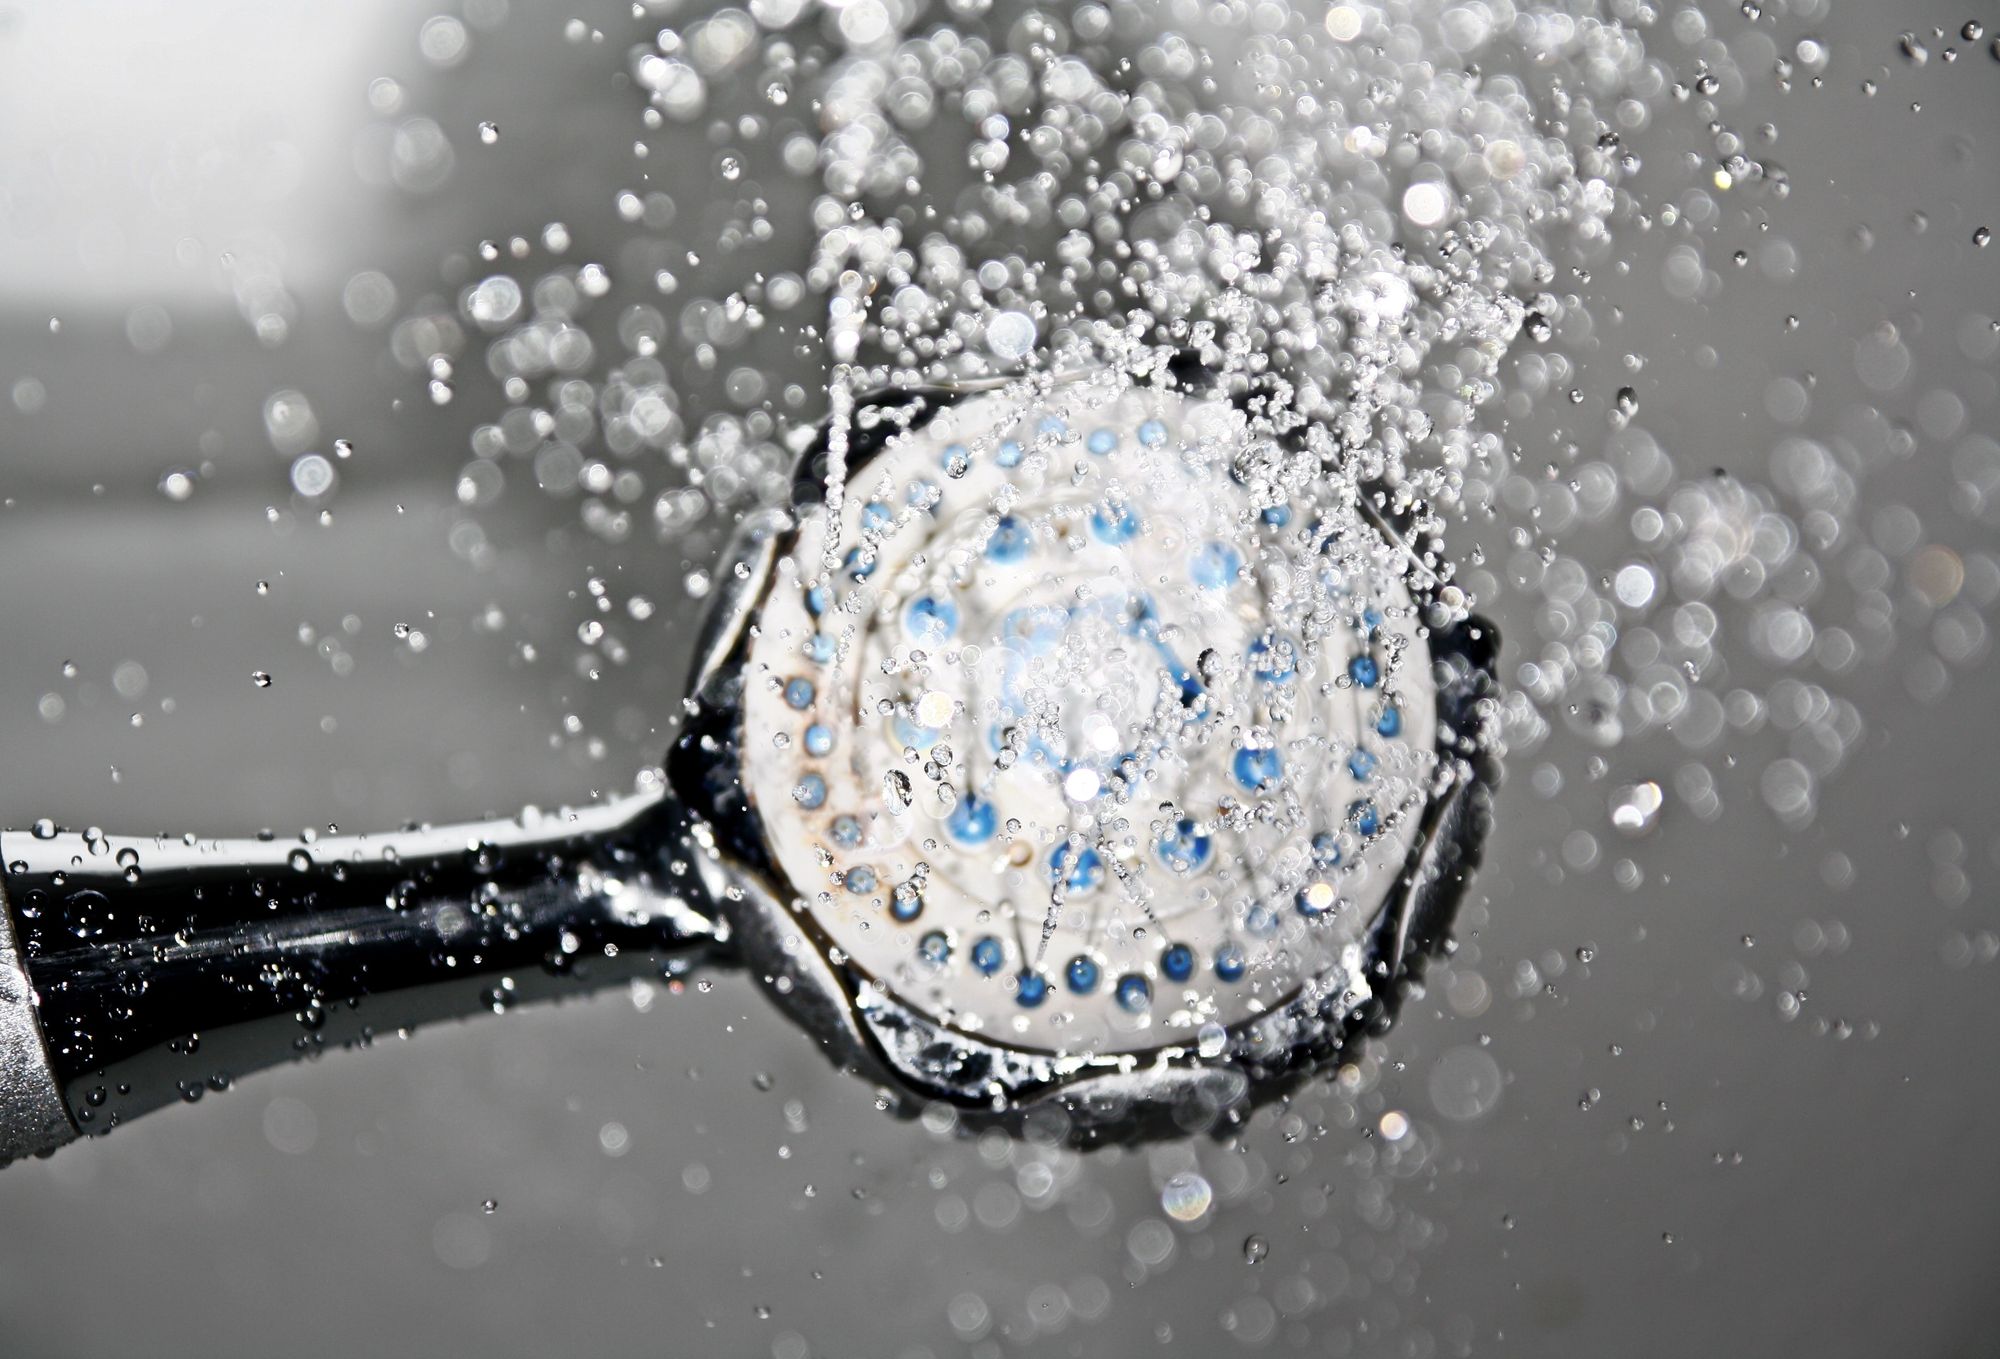 The positive effects of cold showers